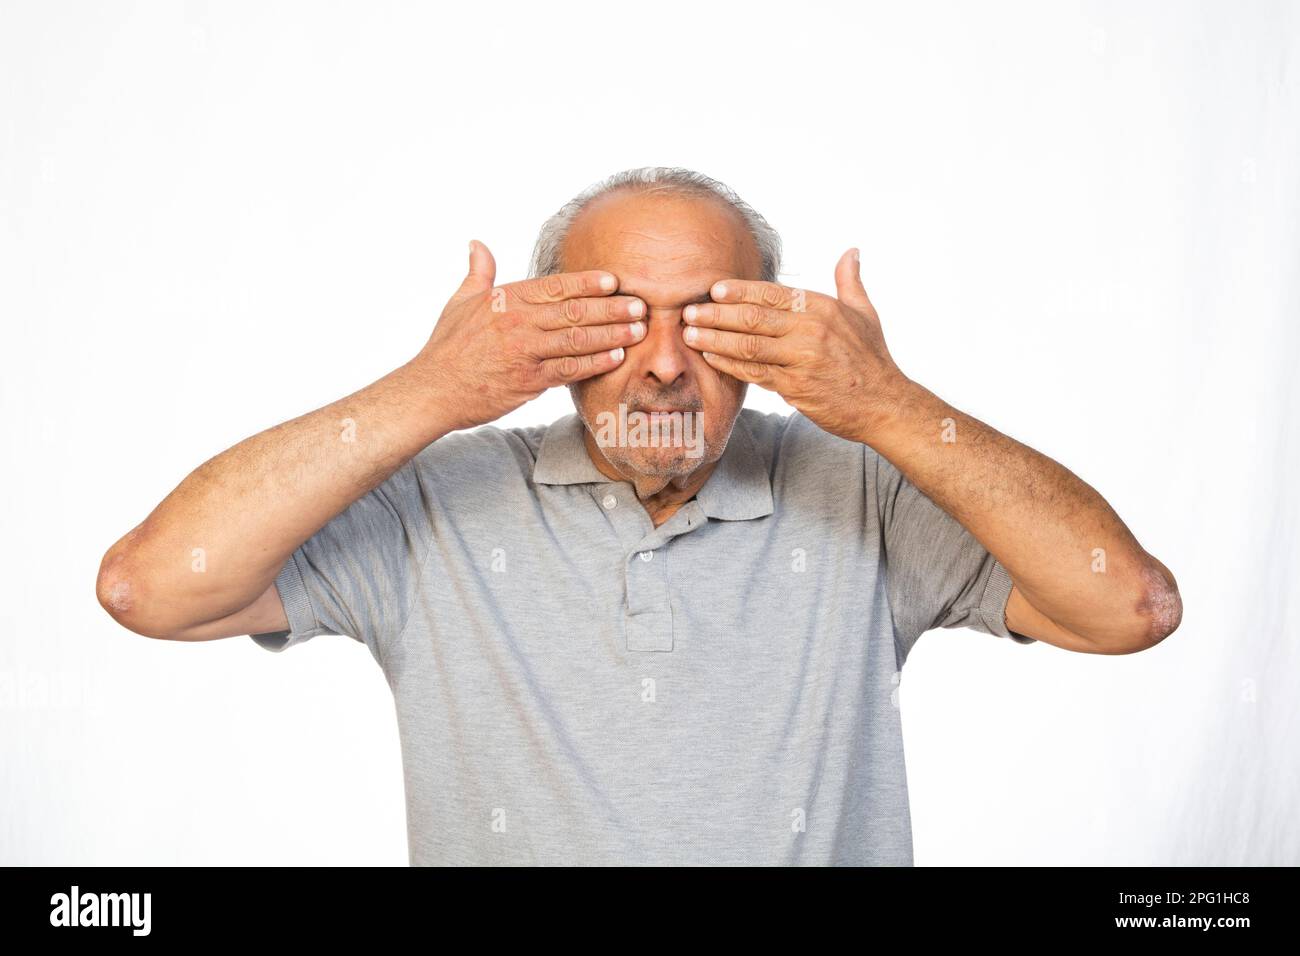 Old man covering his eyes Stock Photo